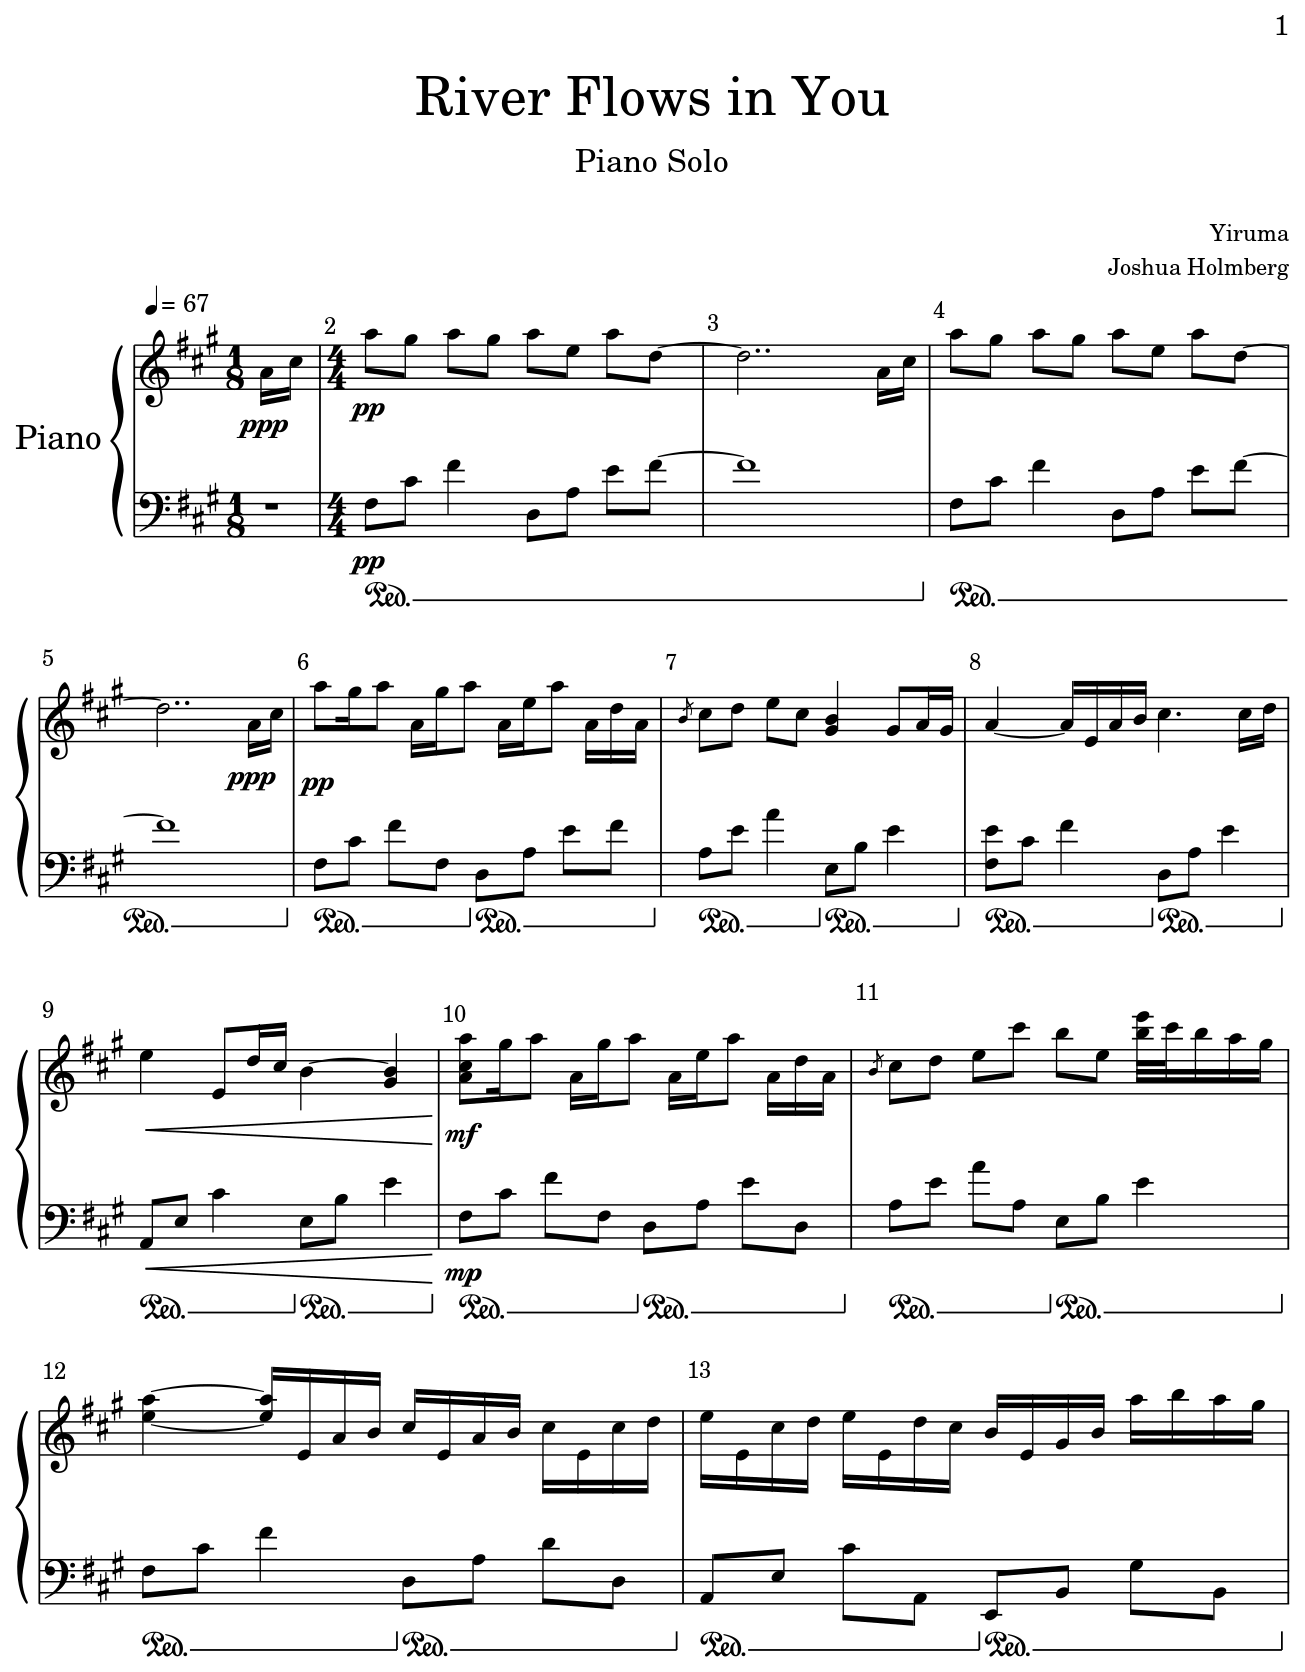 River Flows In You Piano Sheet Music Free Printable - River Flows In You | Sheet Music Direct - Download and print in pdf or midi free sheet music for river flows in you by yiruma arranged by veeroonaa for piano (solo)